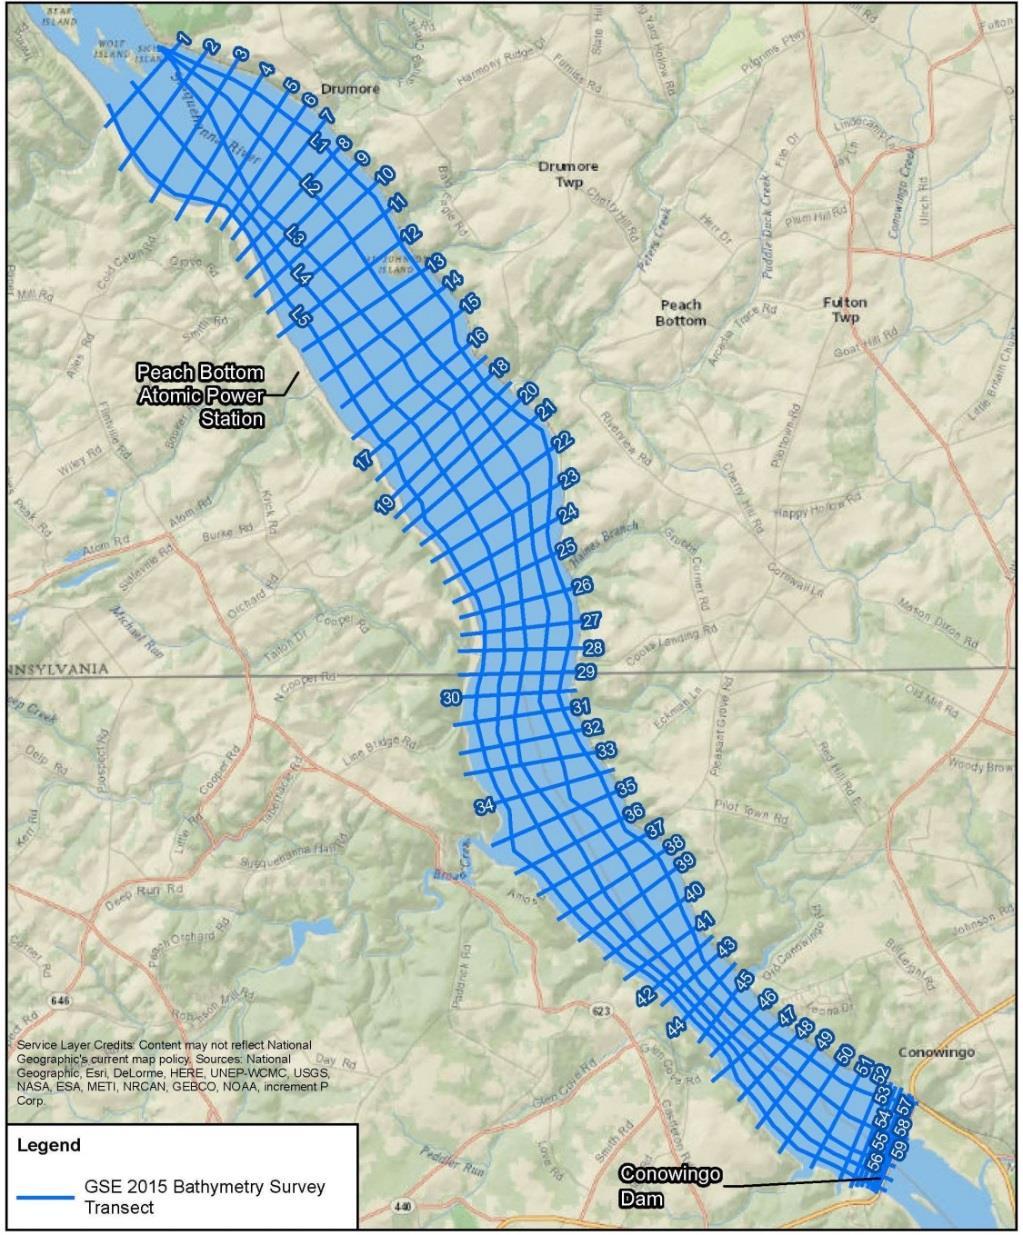 LSR Reservoir Bathymetry Surveys 2015 Surveys were conducted: Conowingo Pond: May 2015 59 transects and 5 longitudinals Lake Clarke and Lake Aldred: October 2015 42 transects and 5 longitudinals